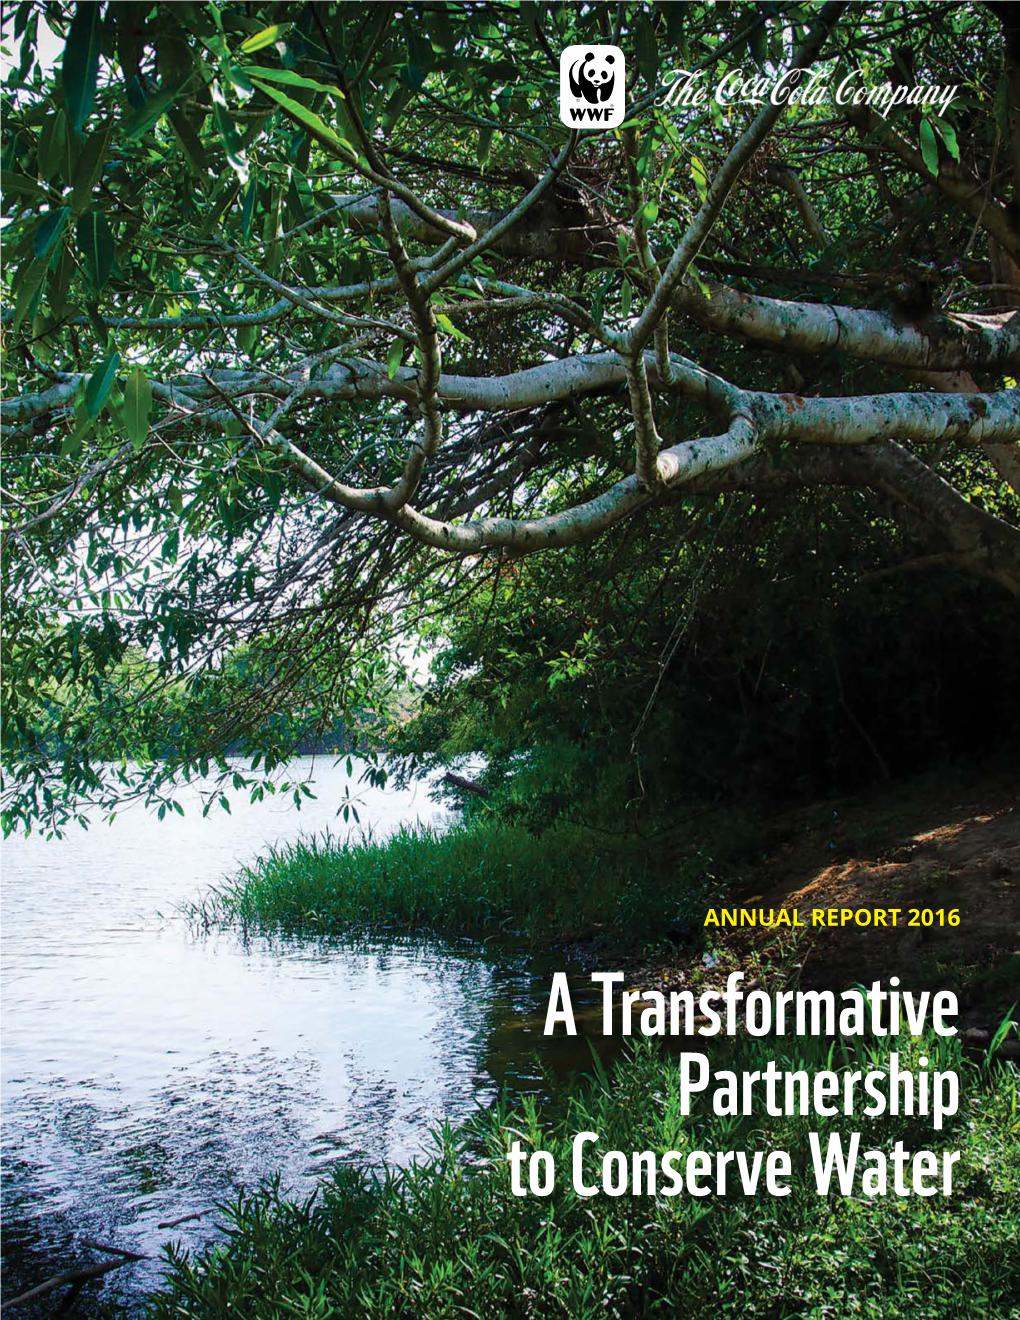 A Transformative Partnership to Conserve Water